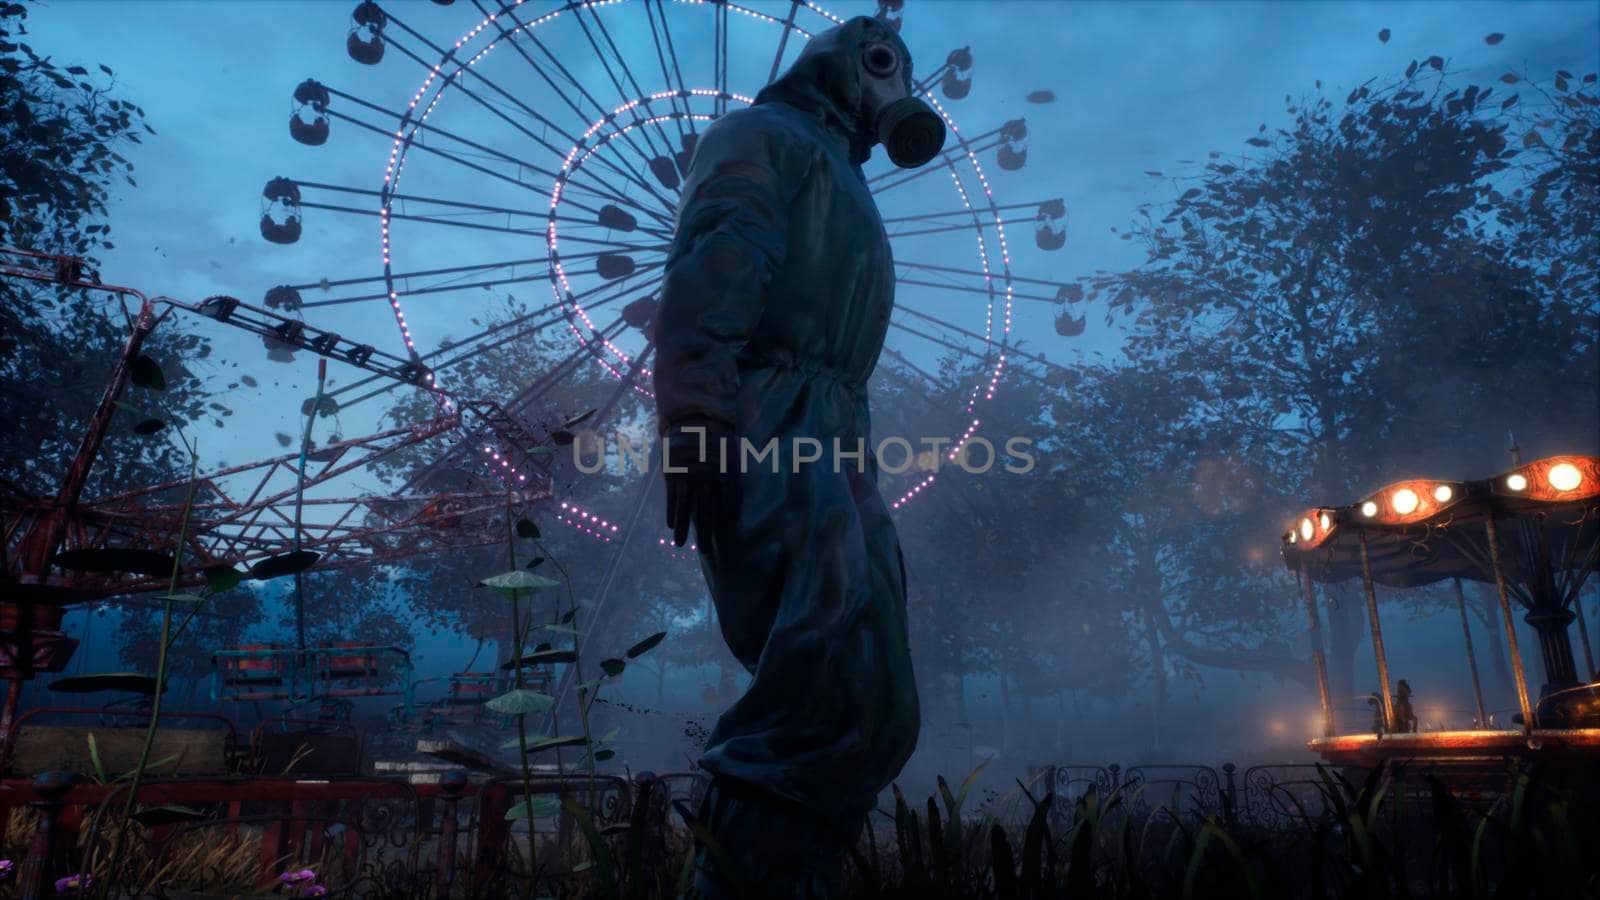 Stalker in a chemical protection suit and gas mask in an old abandoned Park.